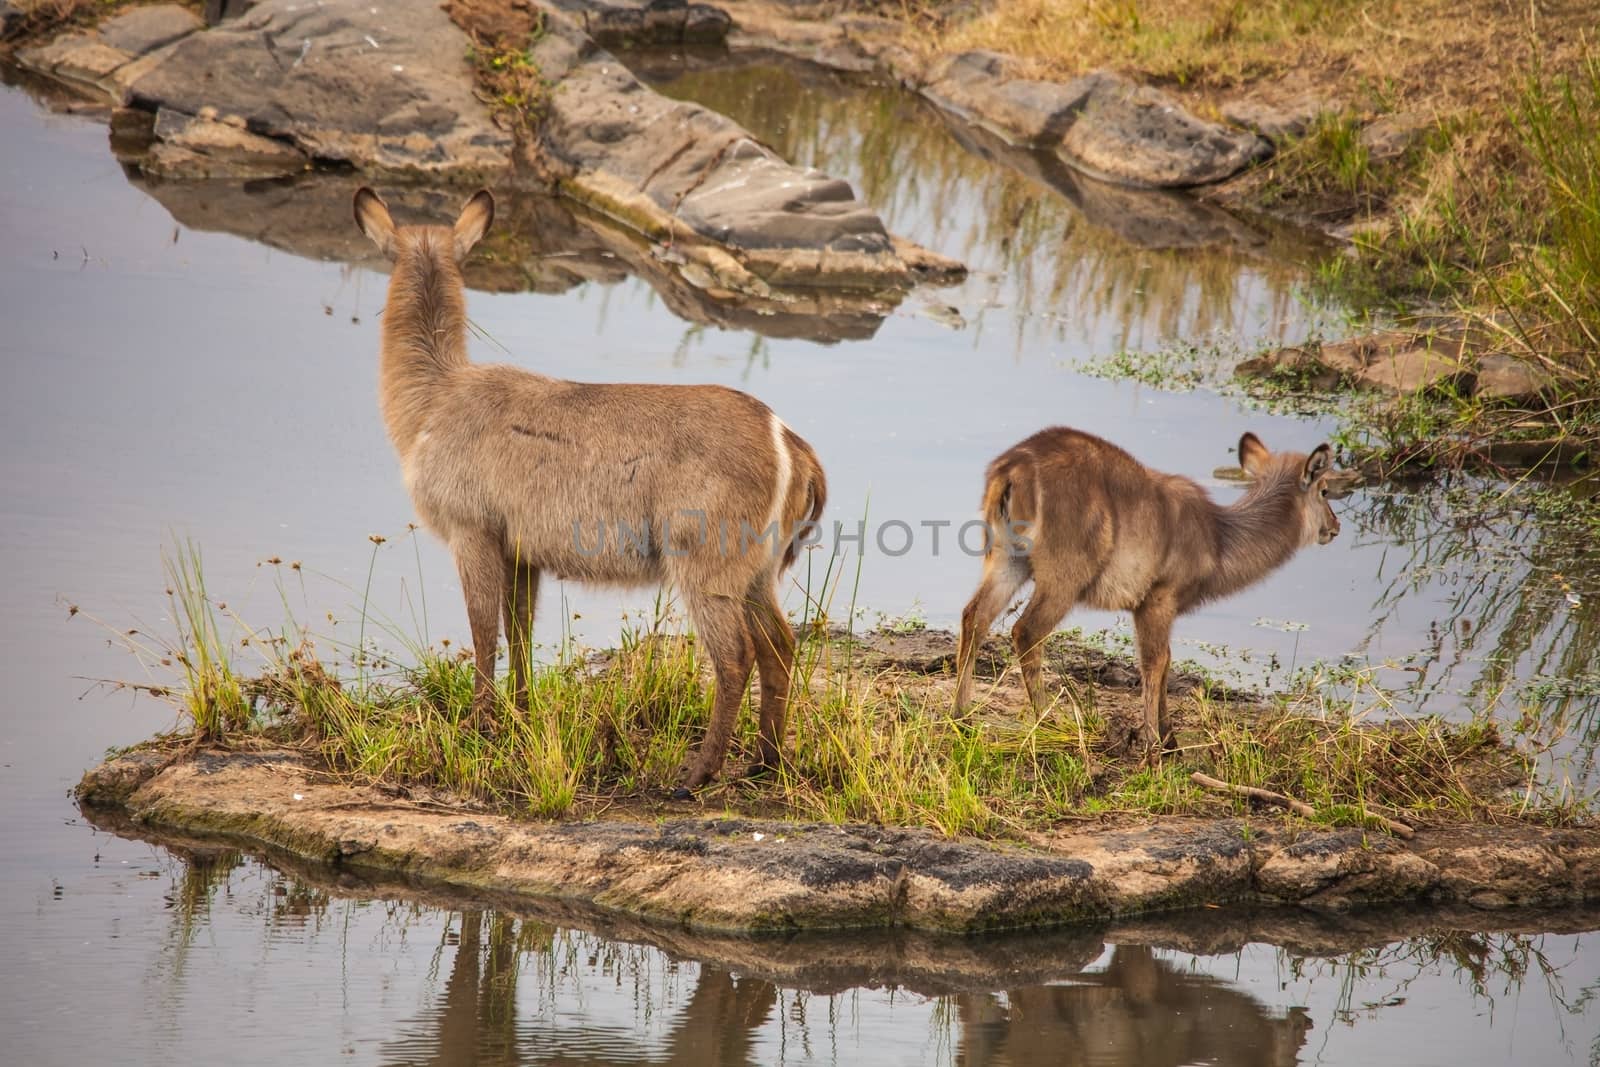 Waterbuck (Kobus ellipsiprymnus) on a small river island in Kruger National Park. South Africa